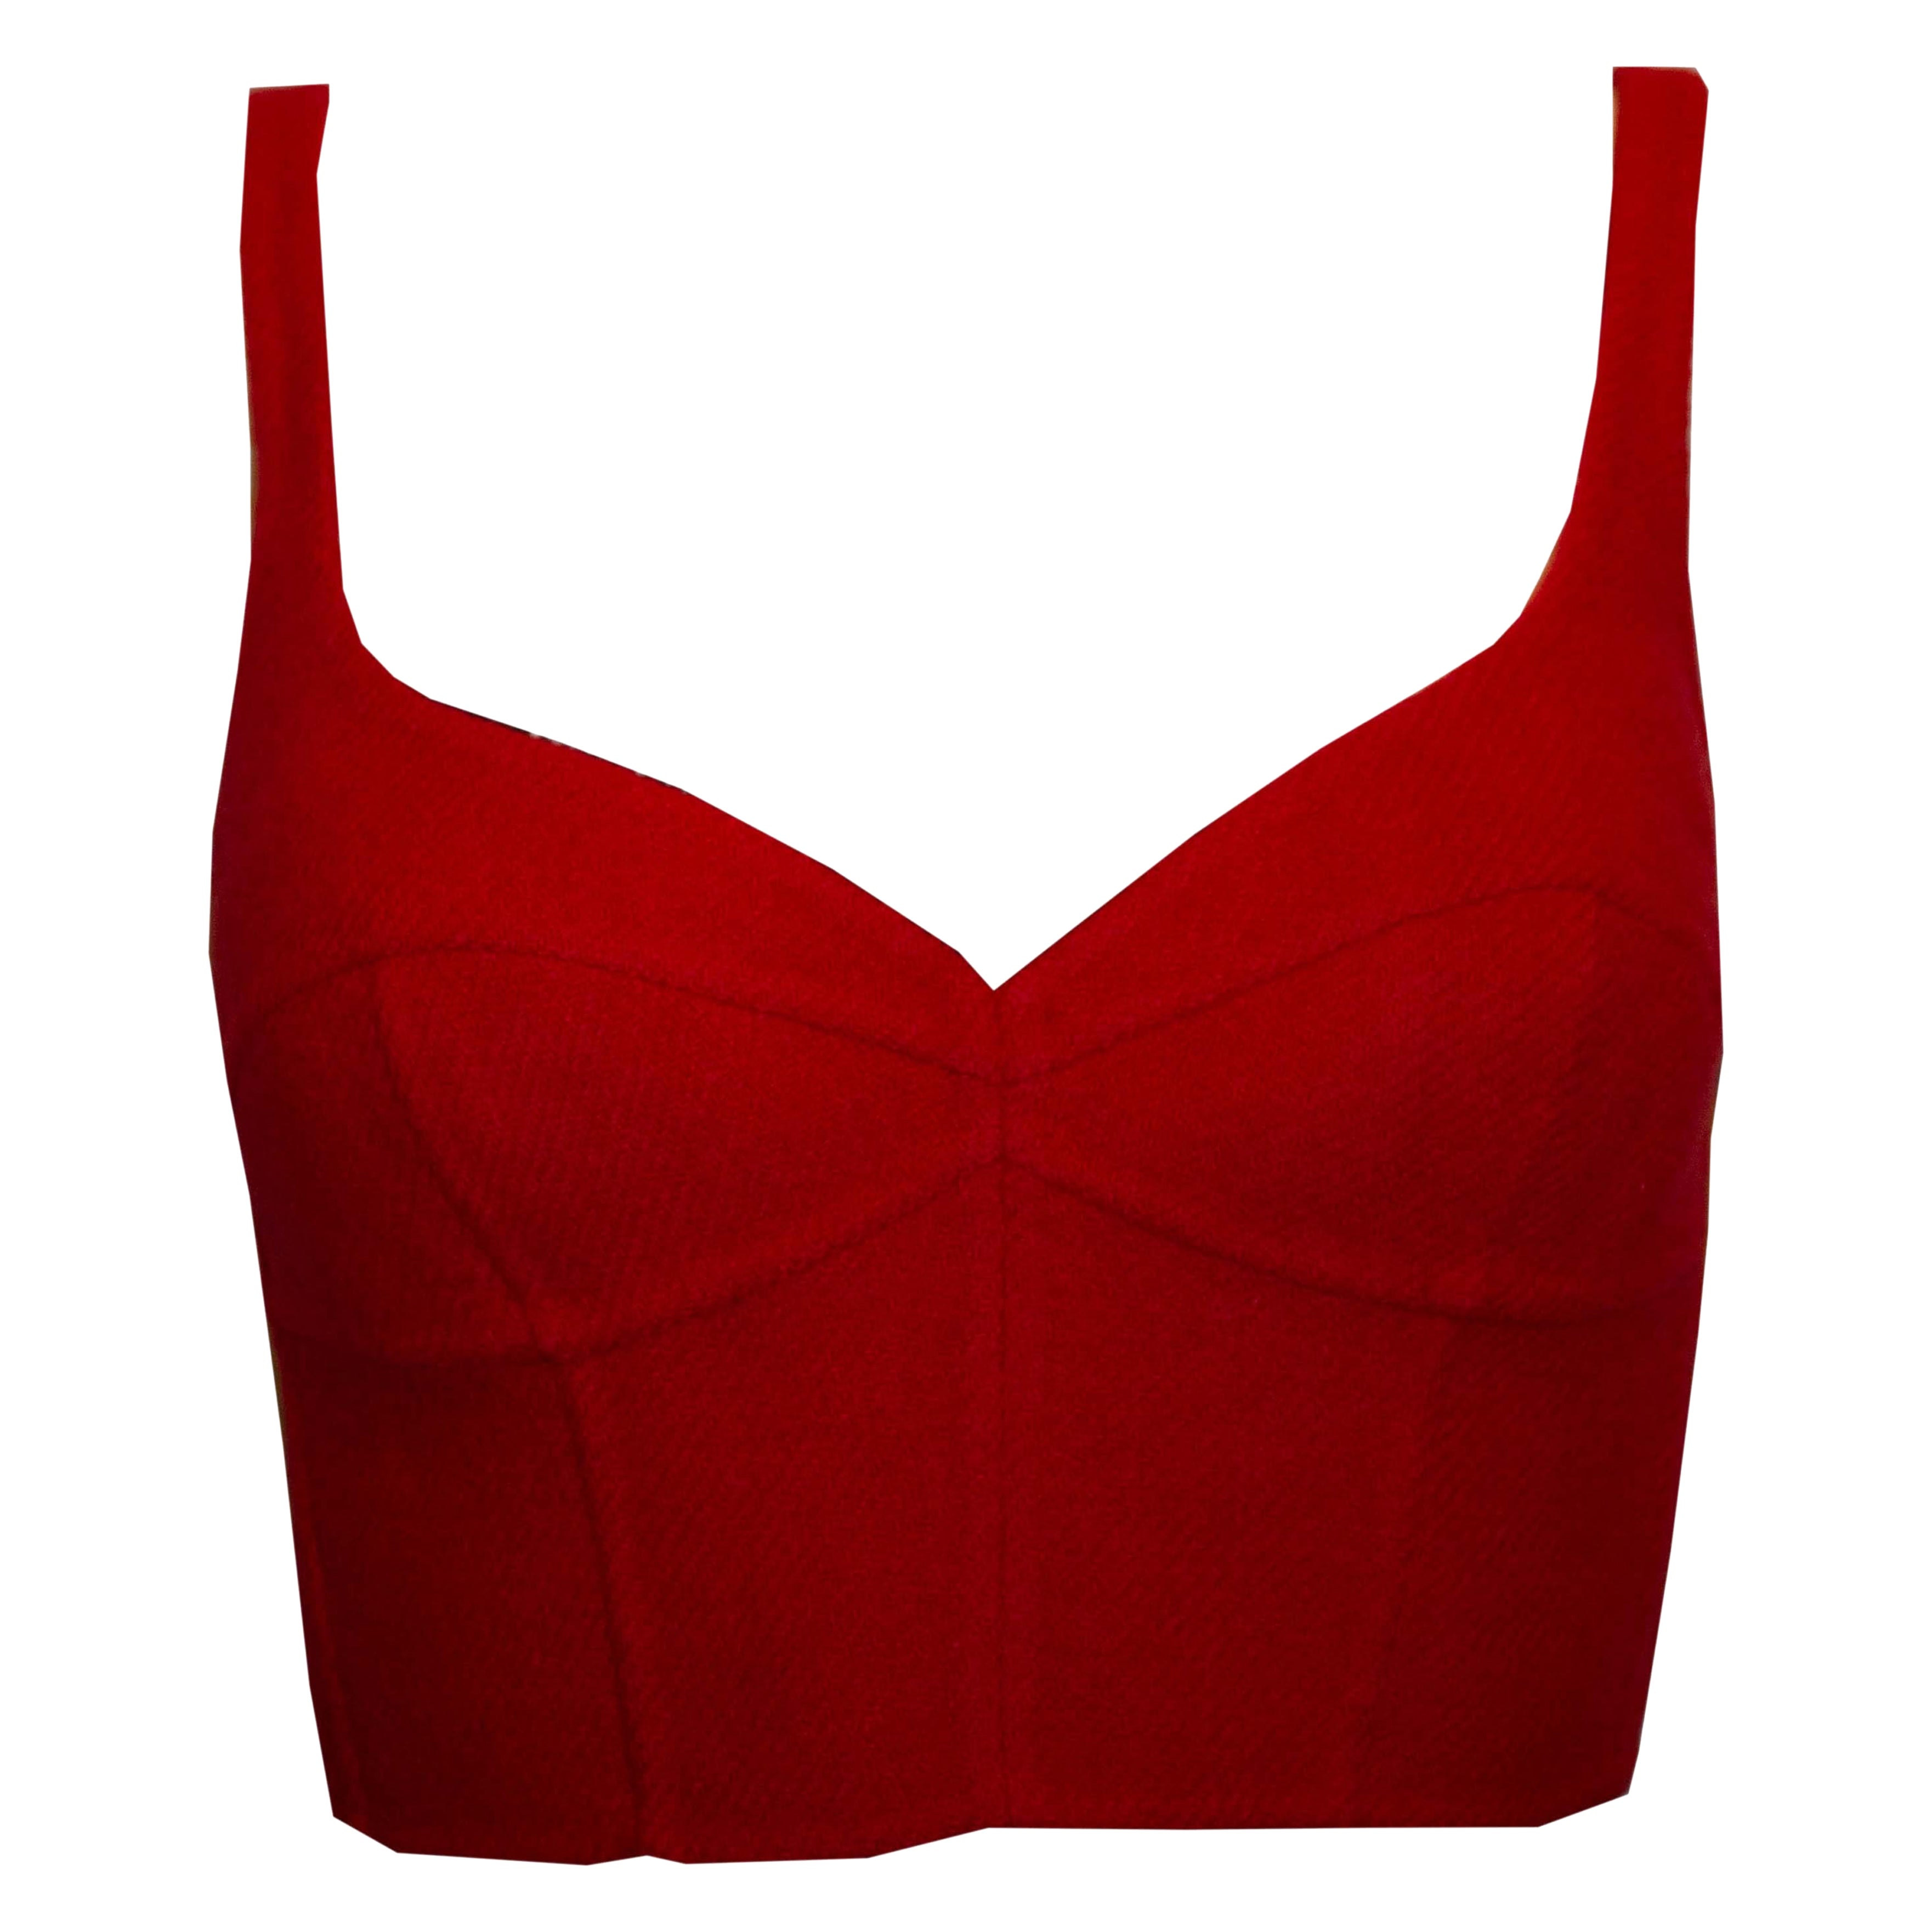 Runway Fall 2020 Marc Jacobs Red Wool Bra Top For Sale